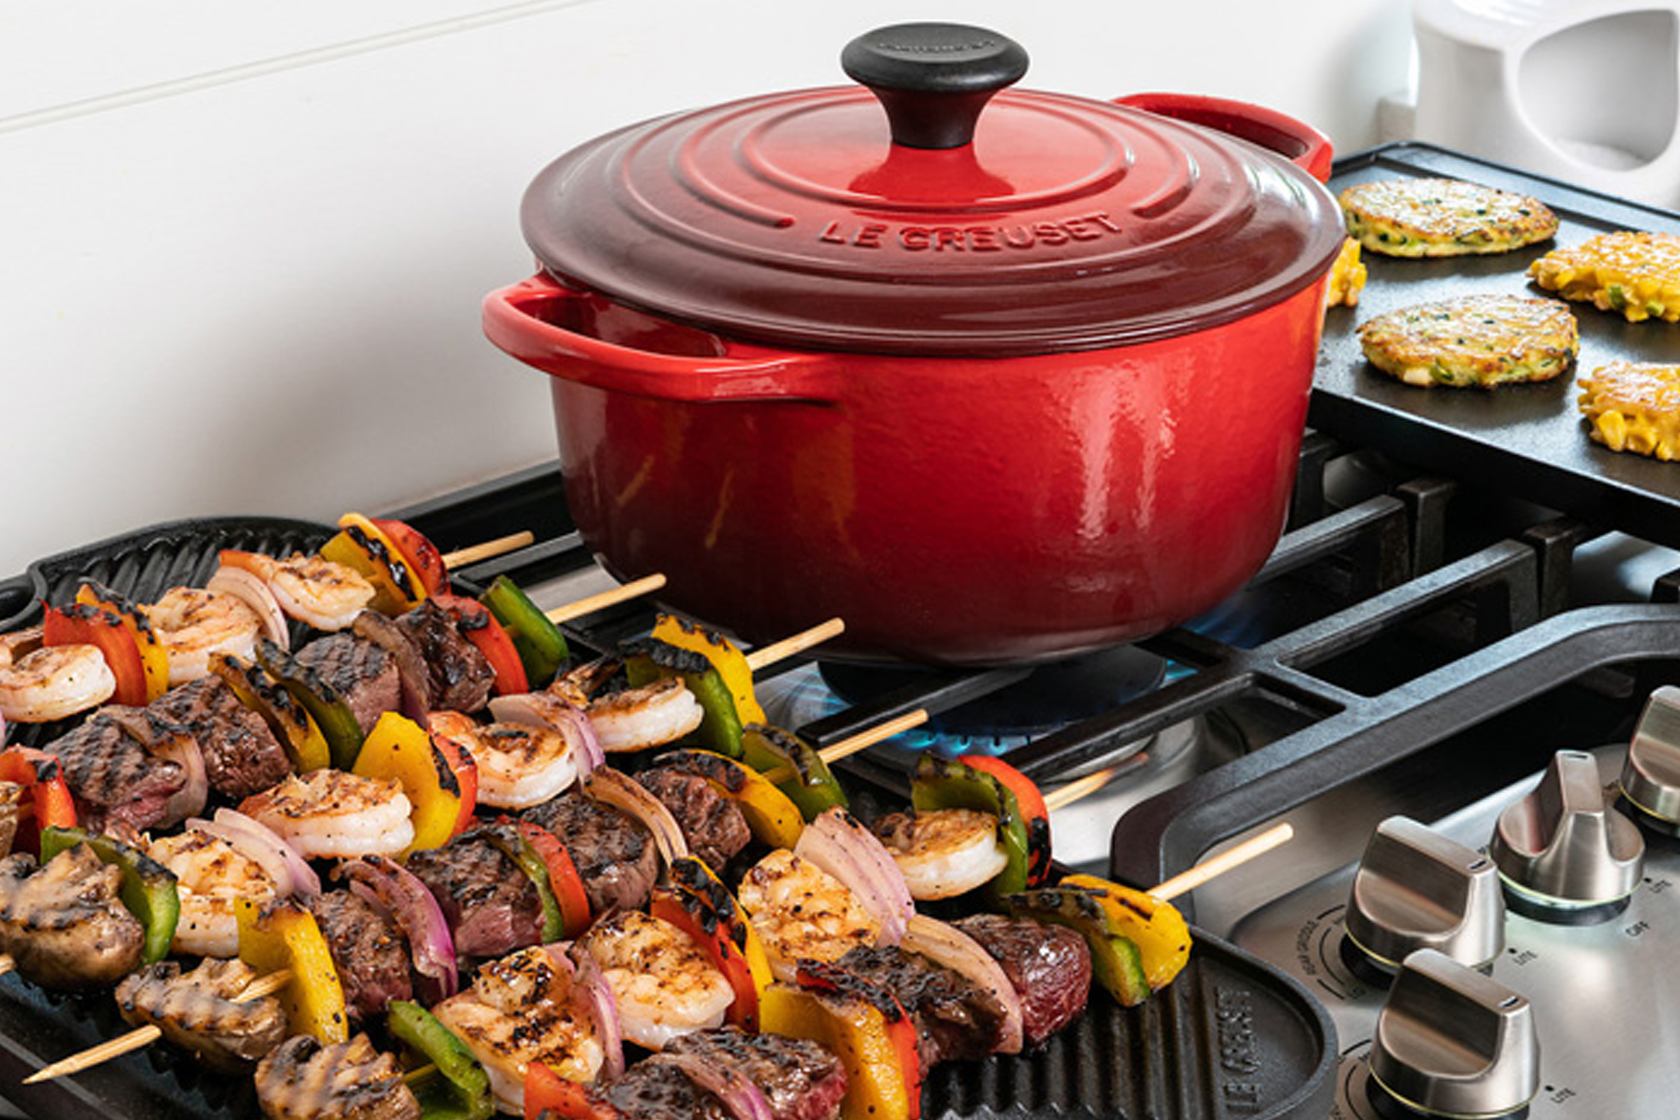 Le Creuset's Factory to Table sale is returning to Pomona, California